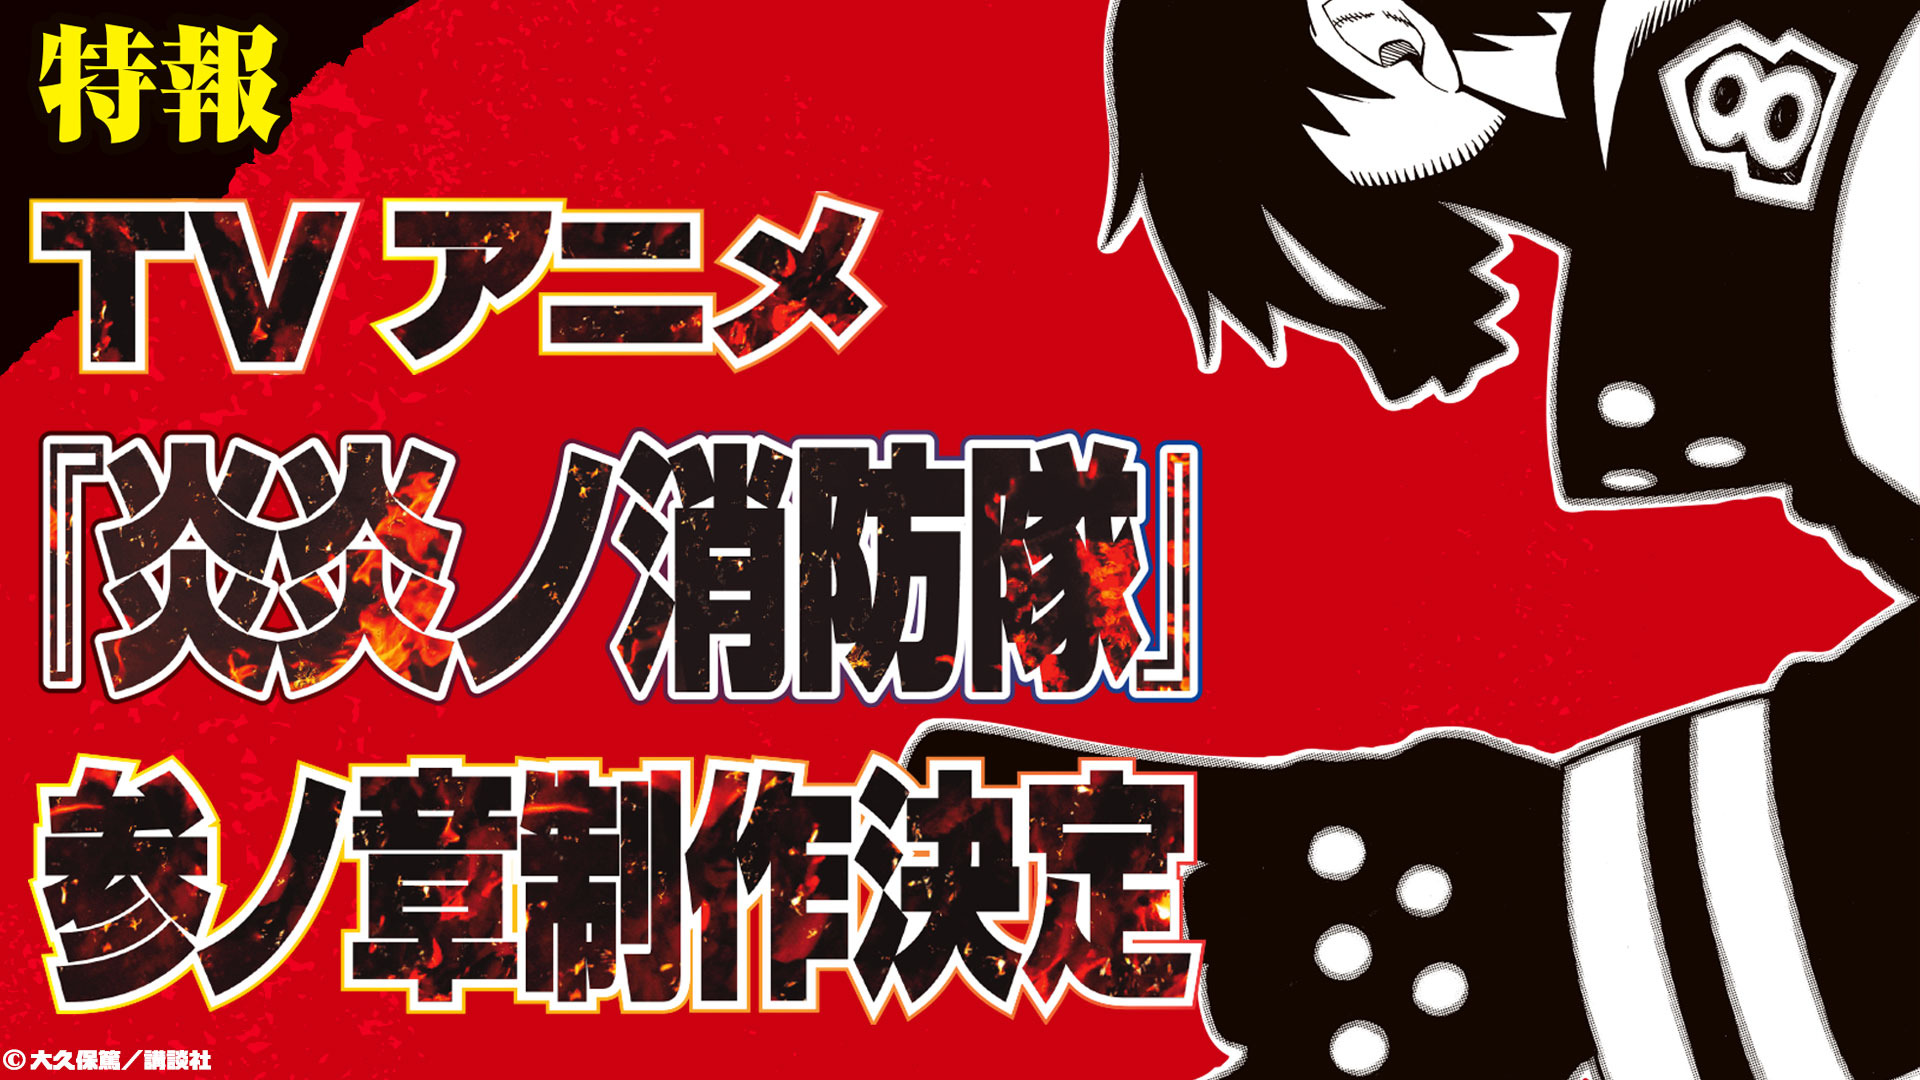 Fire Force Anime Announces Third Season And New Mobile Game - Bounding Into  Comics